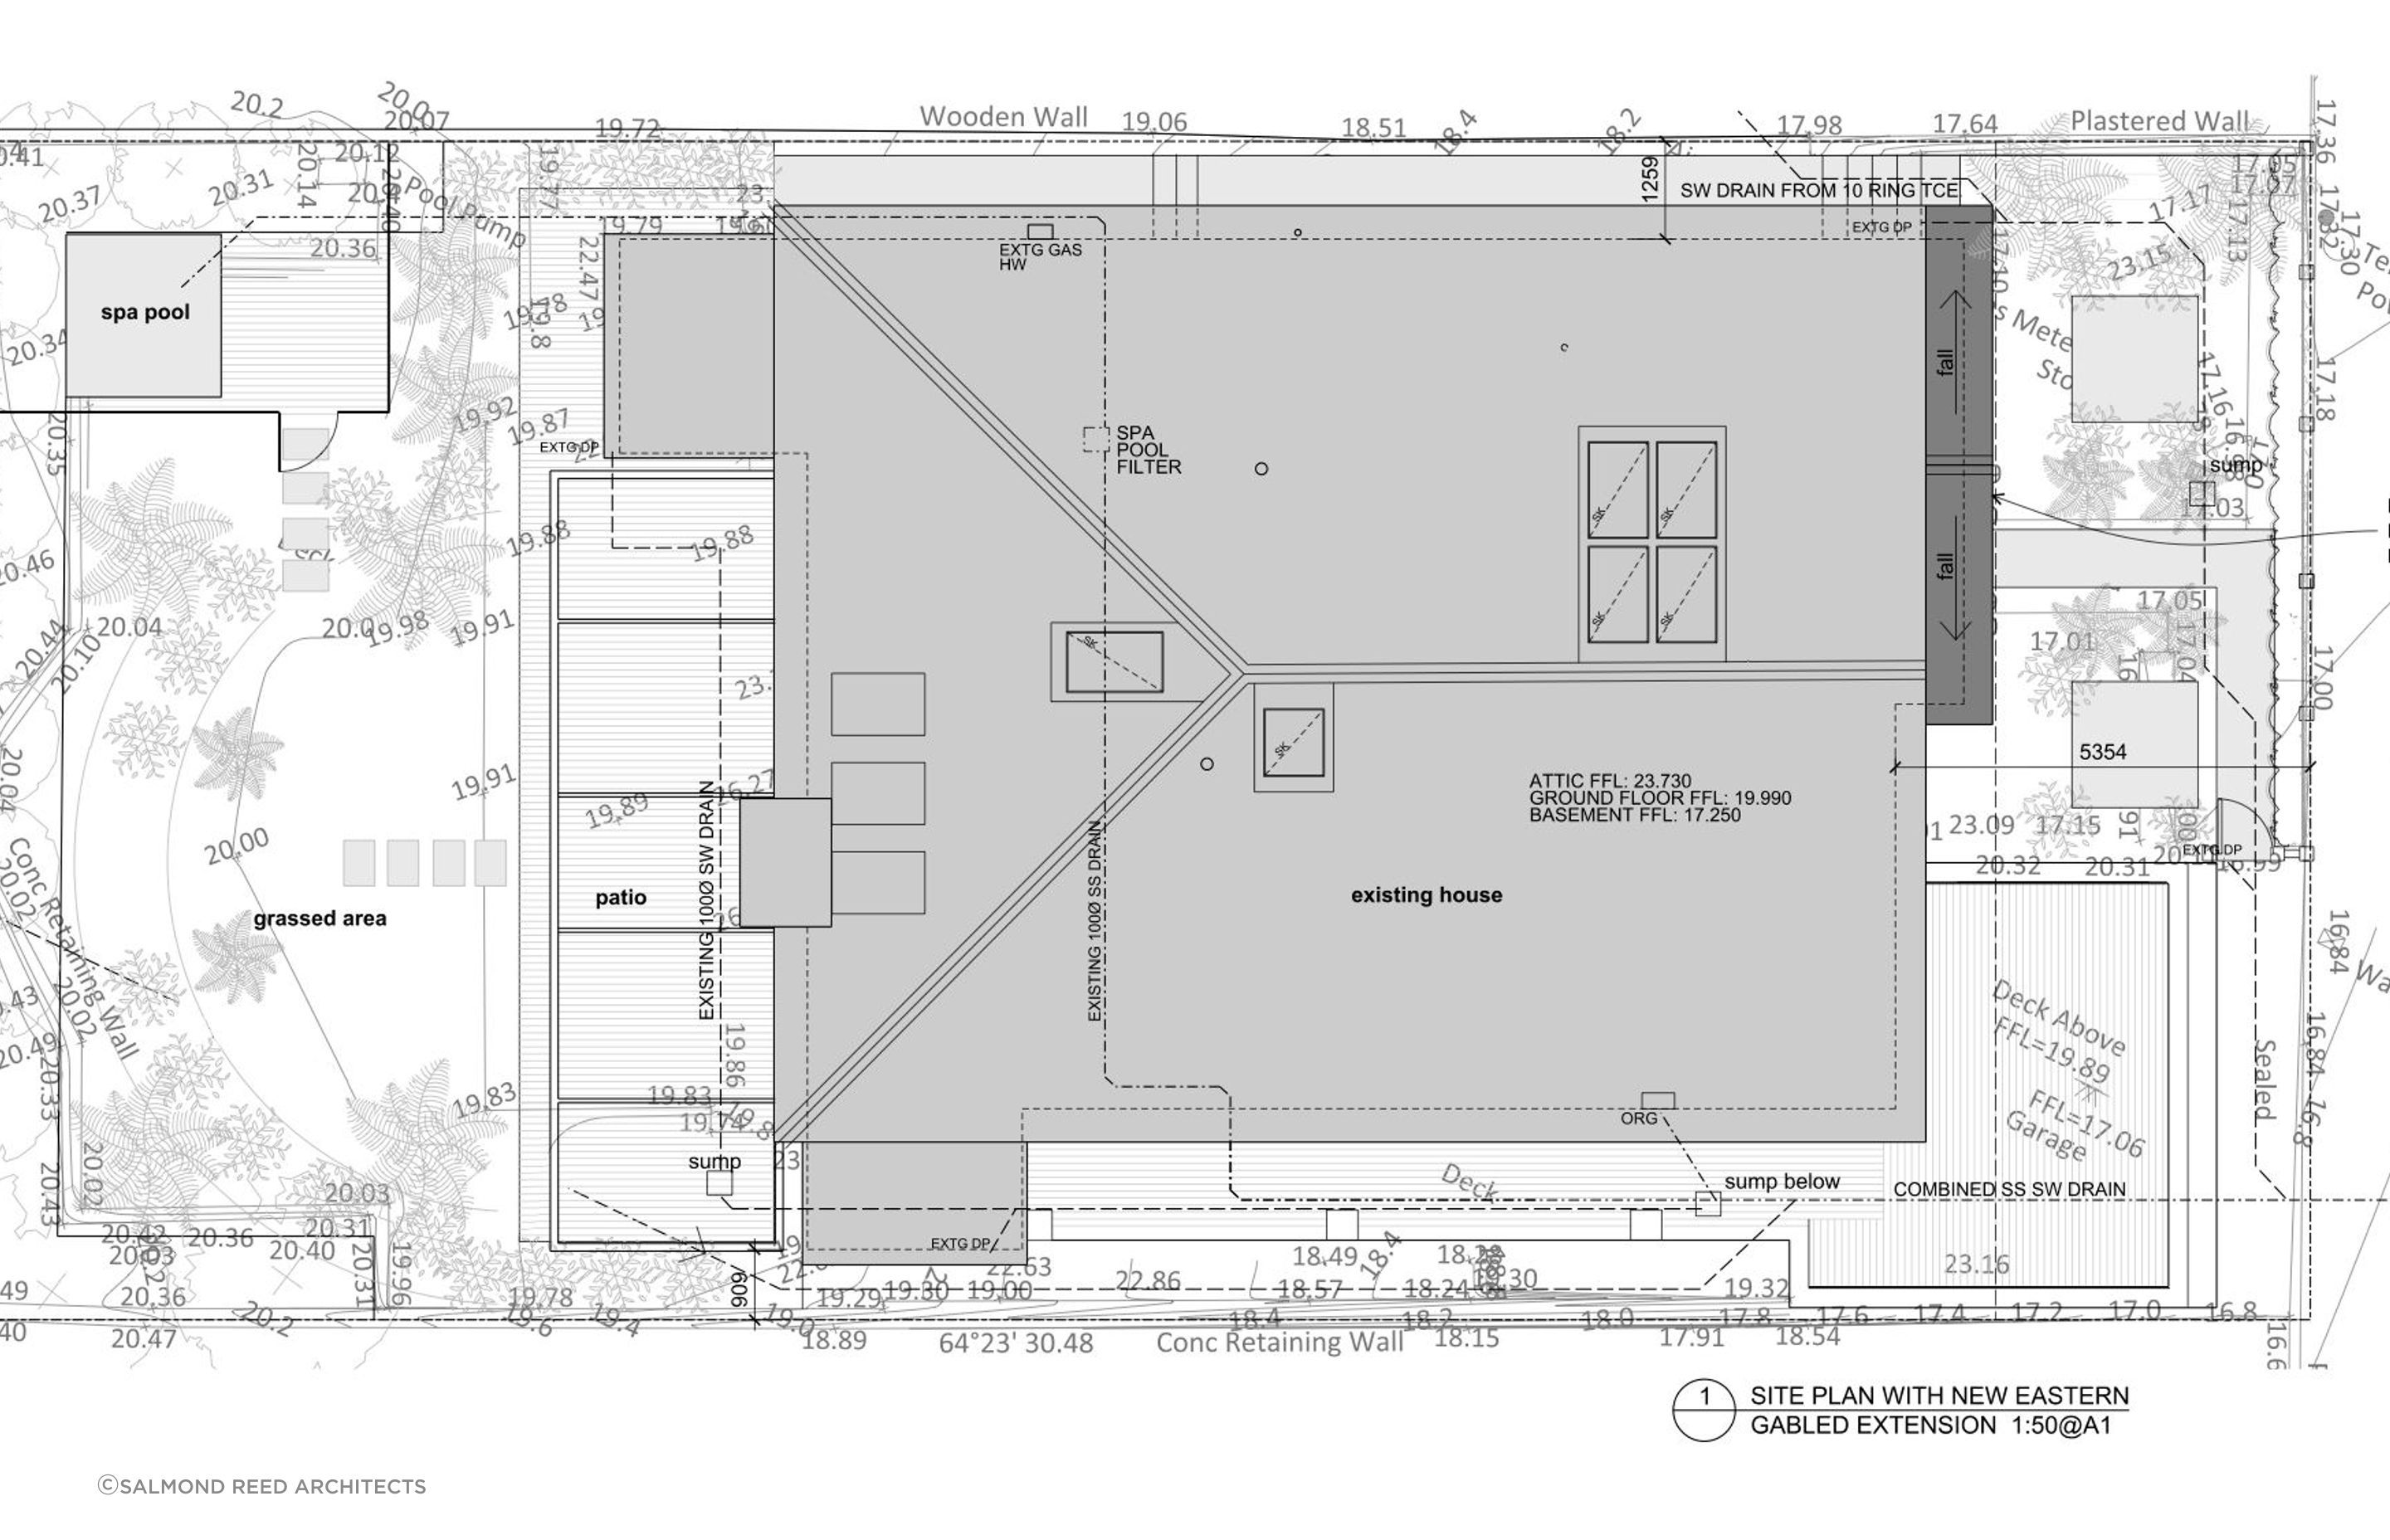 The site plan show the existing house and the new eastern gabled extension.